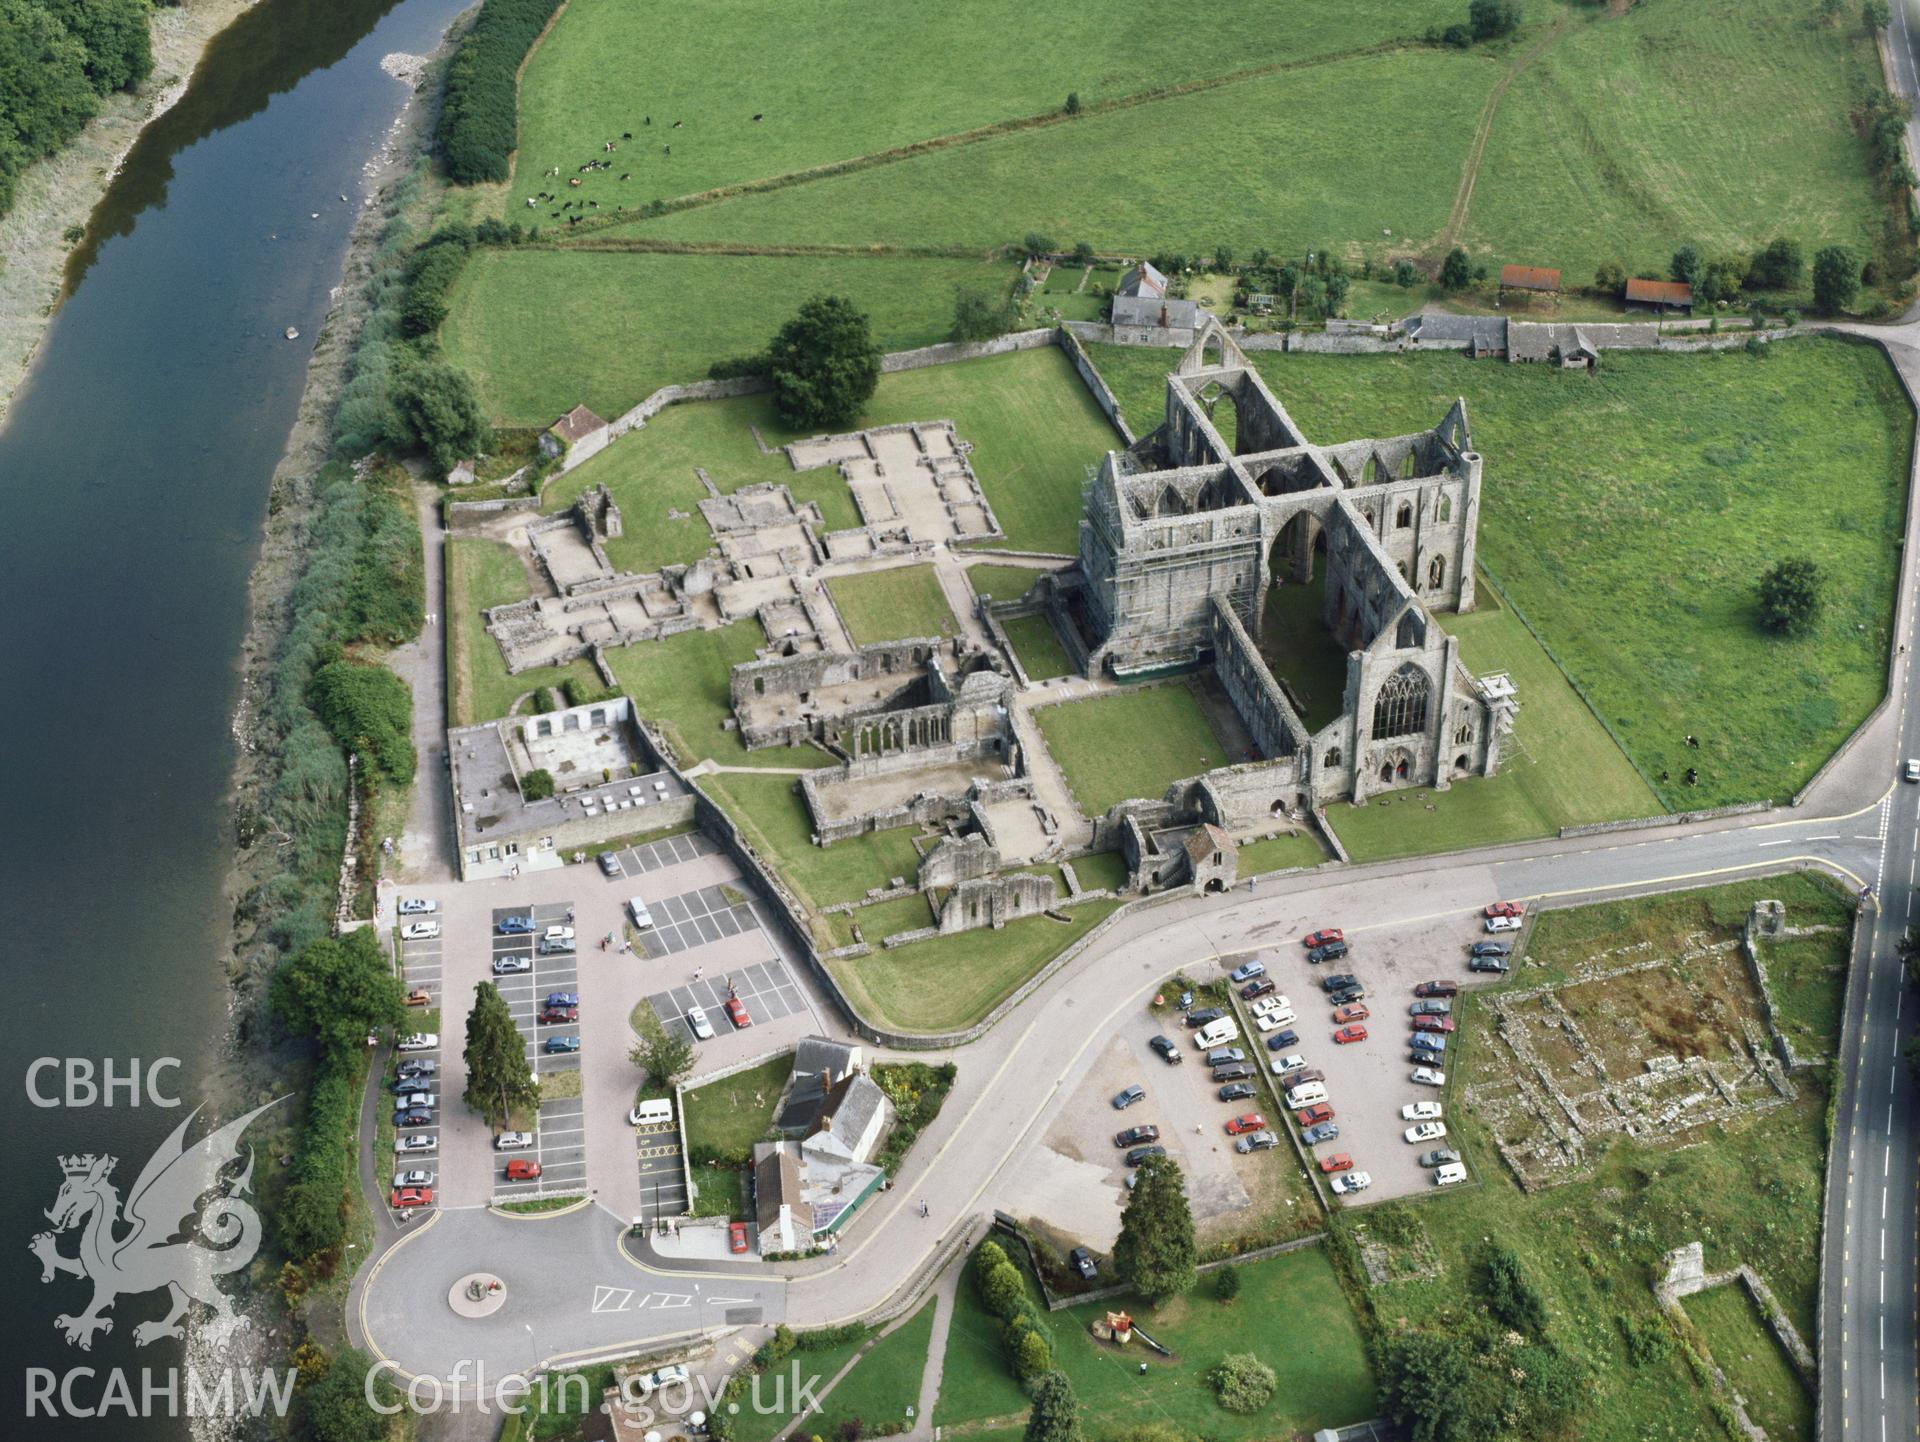 RCAHMW colour oblique aerial photograph of Tintern Abbey, taken by C.R. Musson, 05/08/94